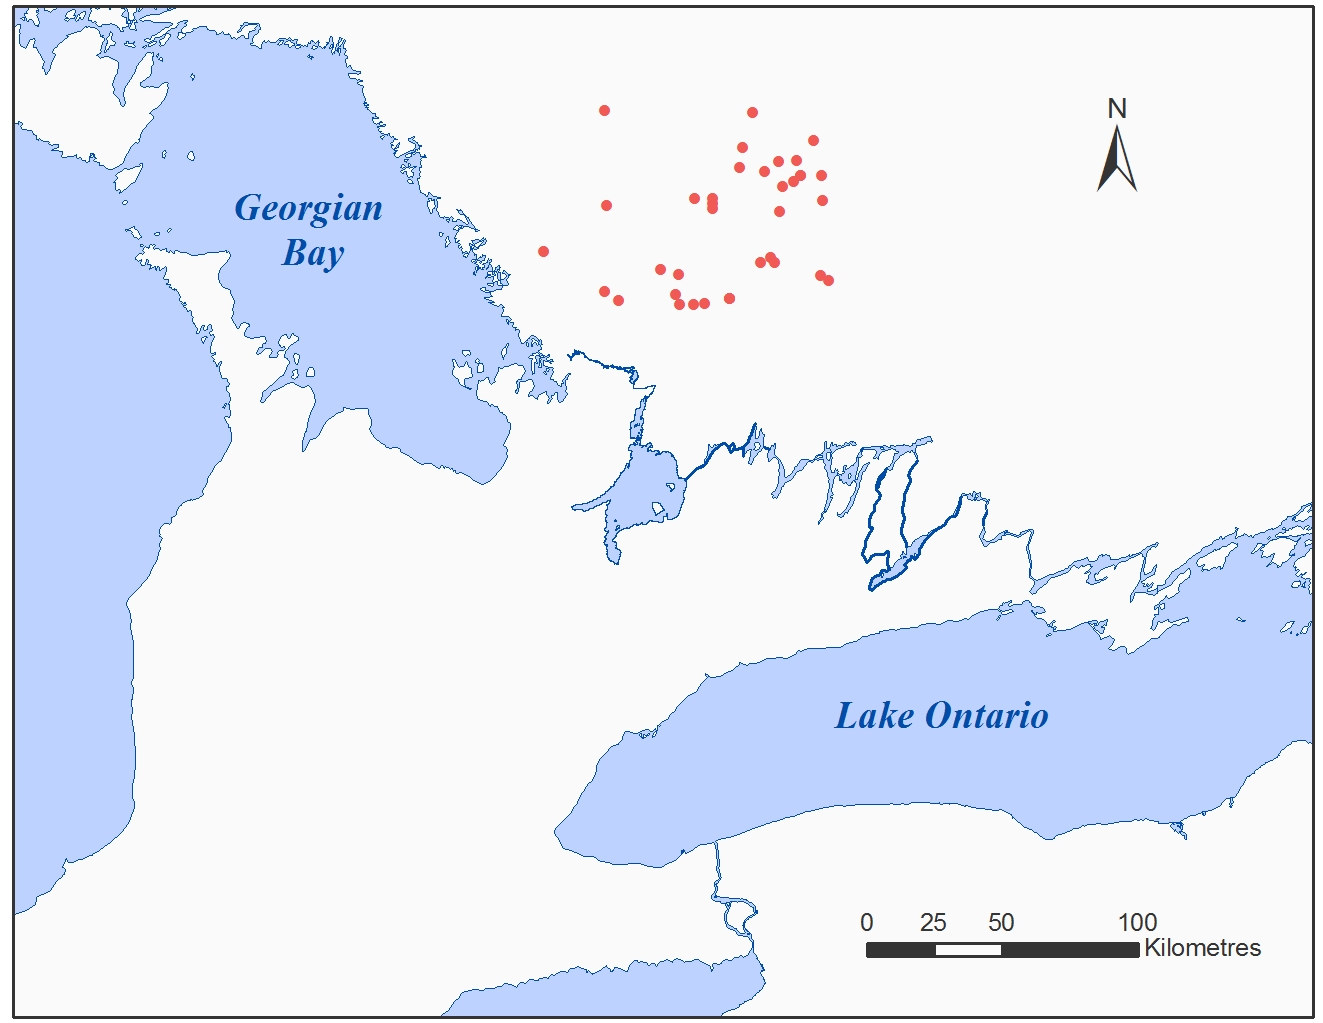 Figure 14: A map of south-central Ontario showing the locations of the study lakes.